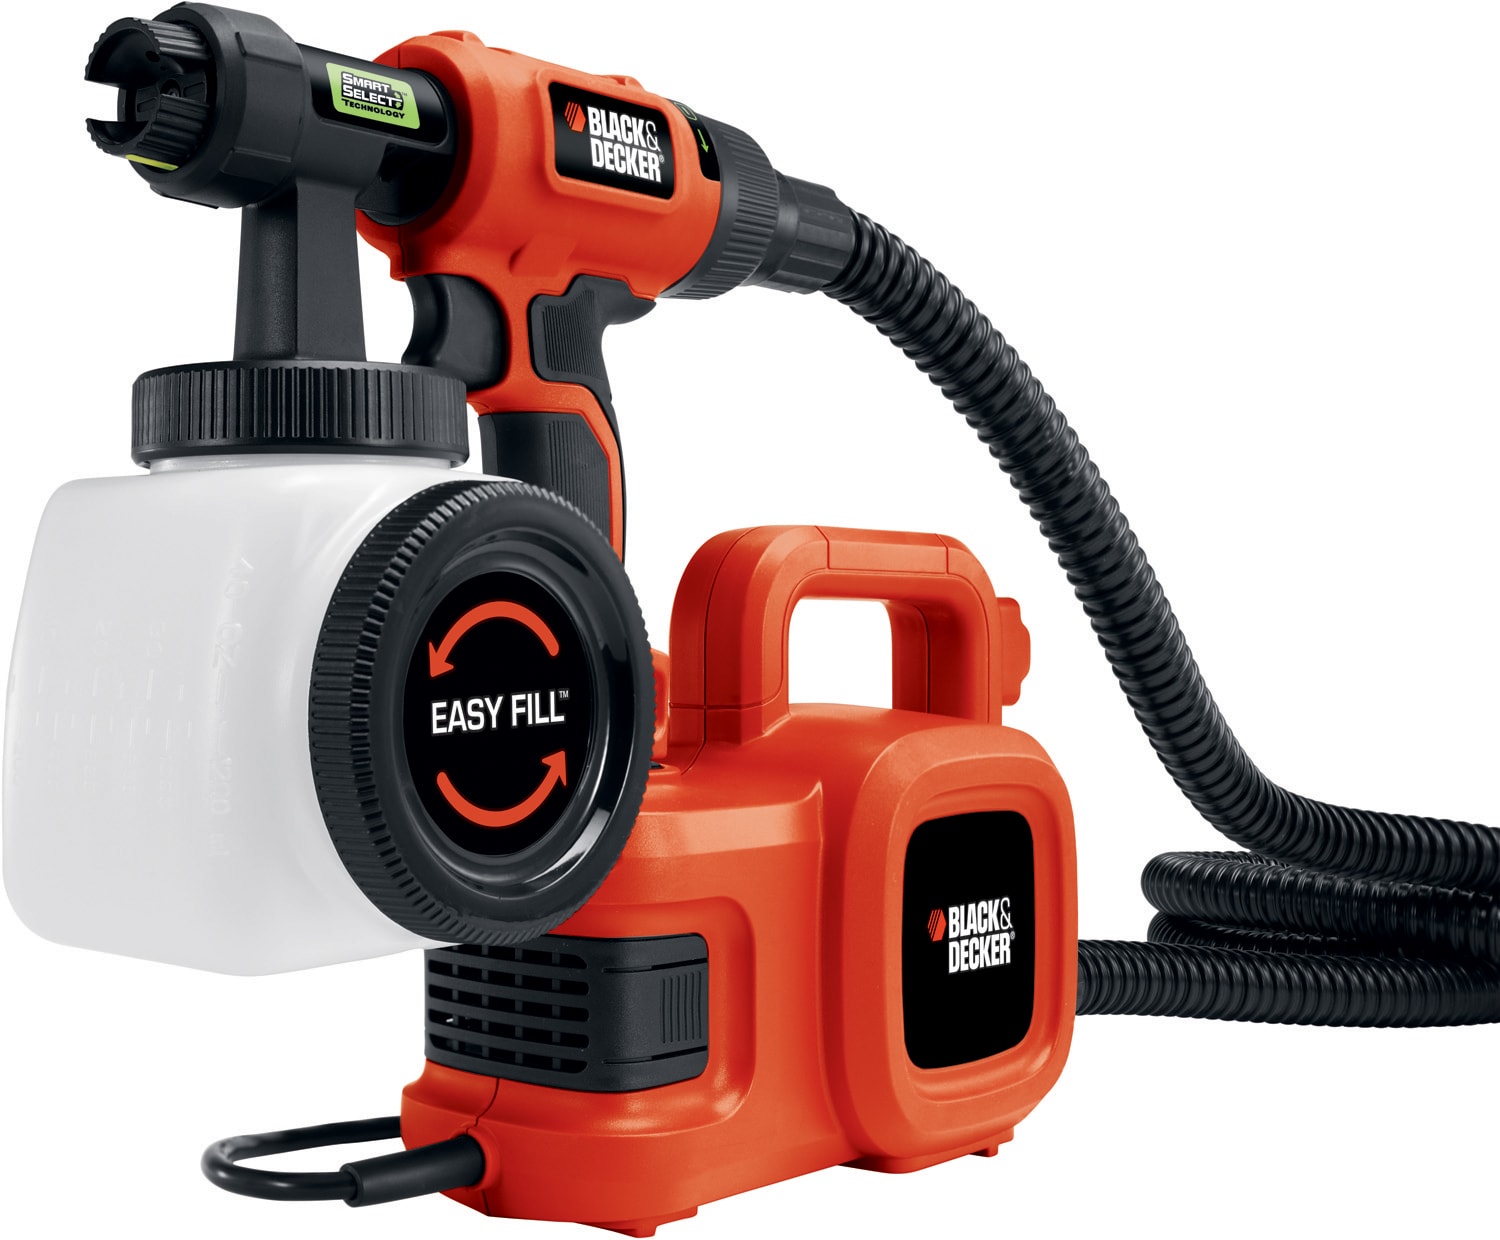 New Black and Decker Stain Sprayer C800611 120 Volts 1.2 Amps Ceramic Spray  D1